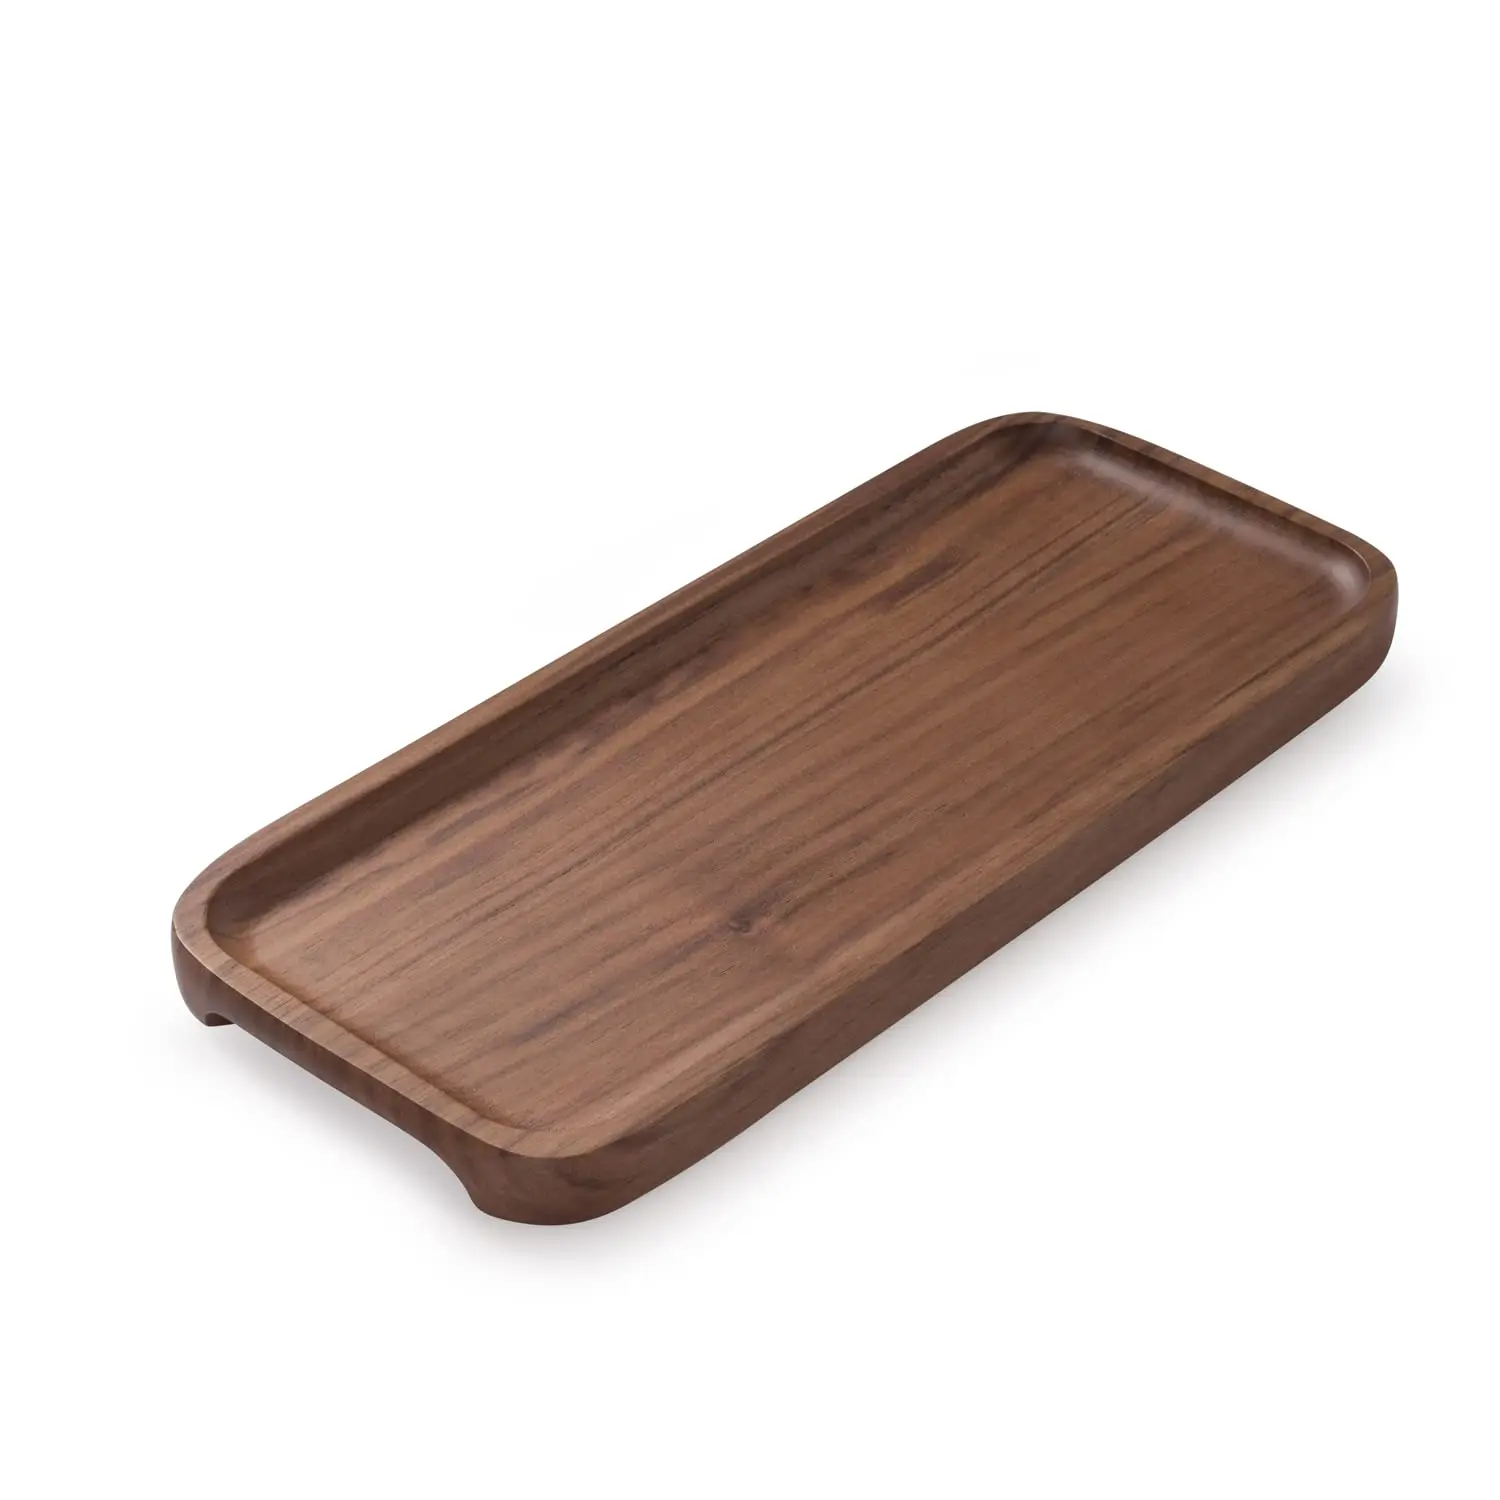 

Walnut Natural Wood Rectangle Serving Tray, Small Wooden for Food BBQ Party Buffet Dessert Appetizer Fruits Cookie Platter